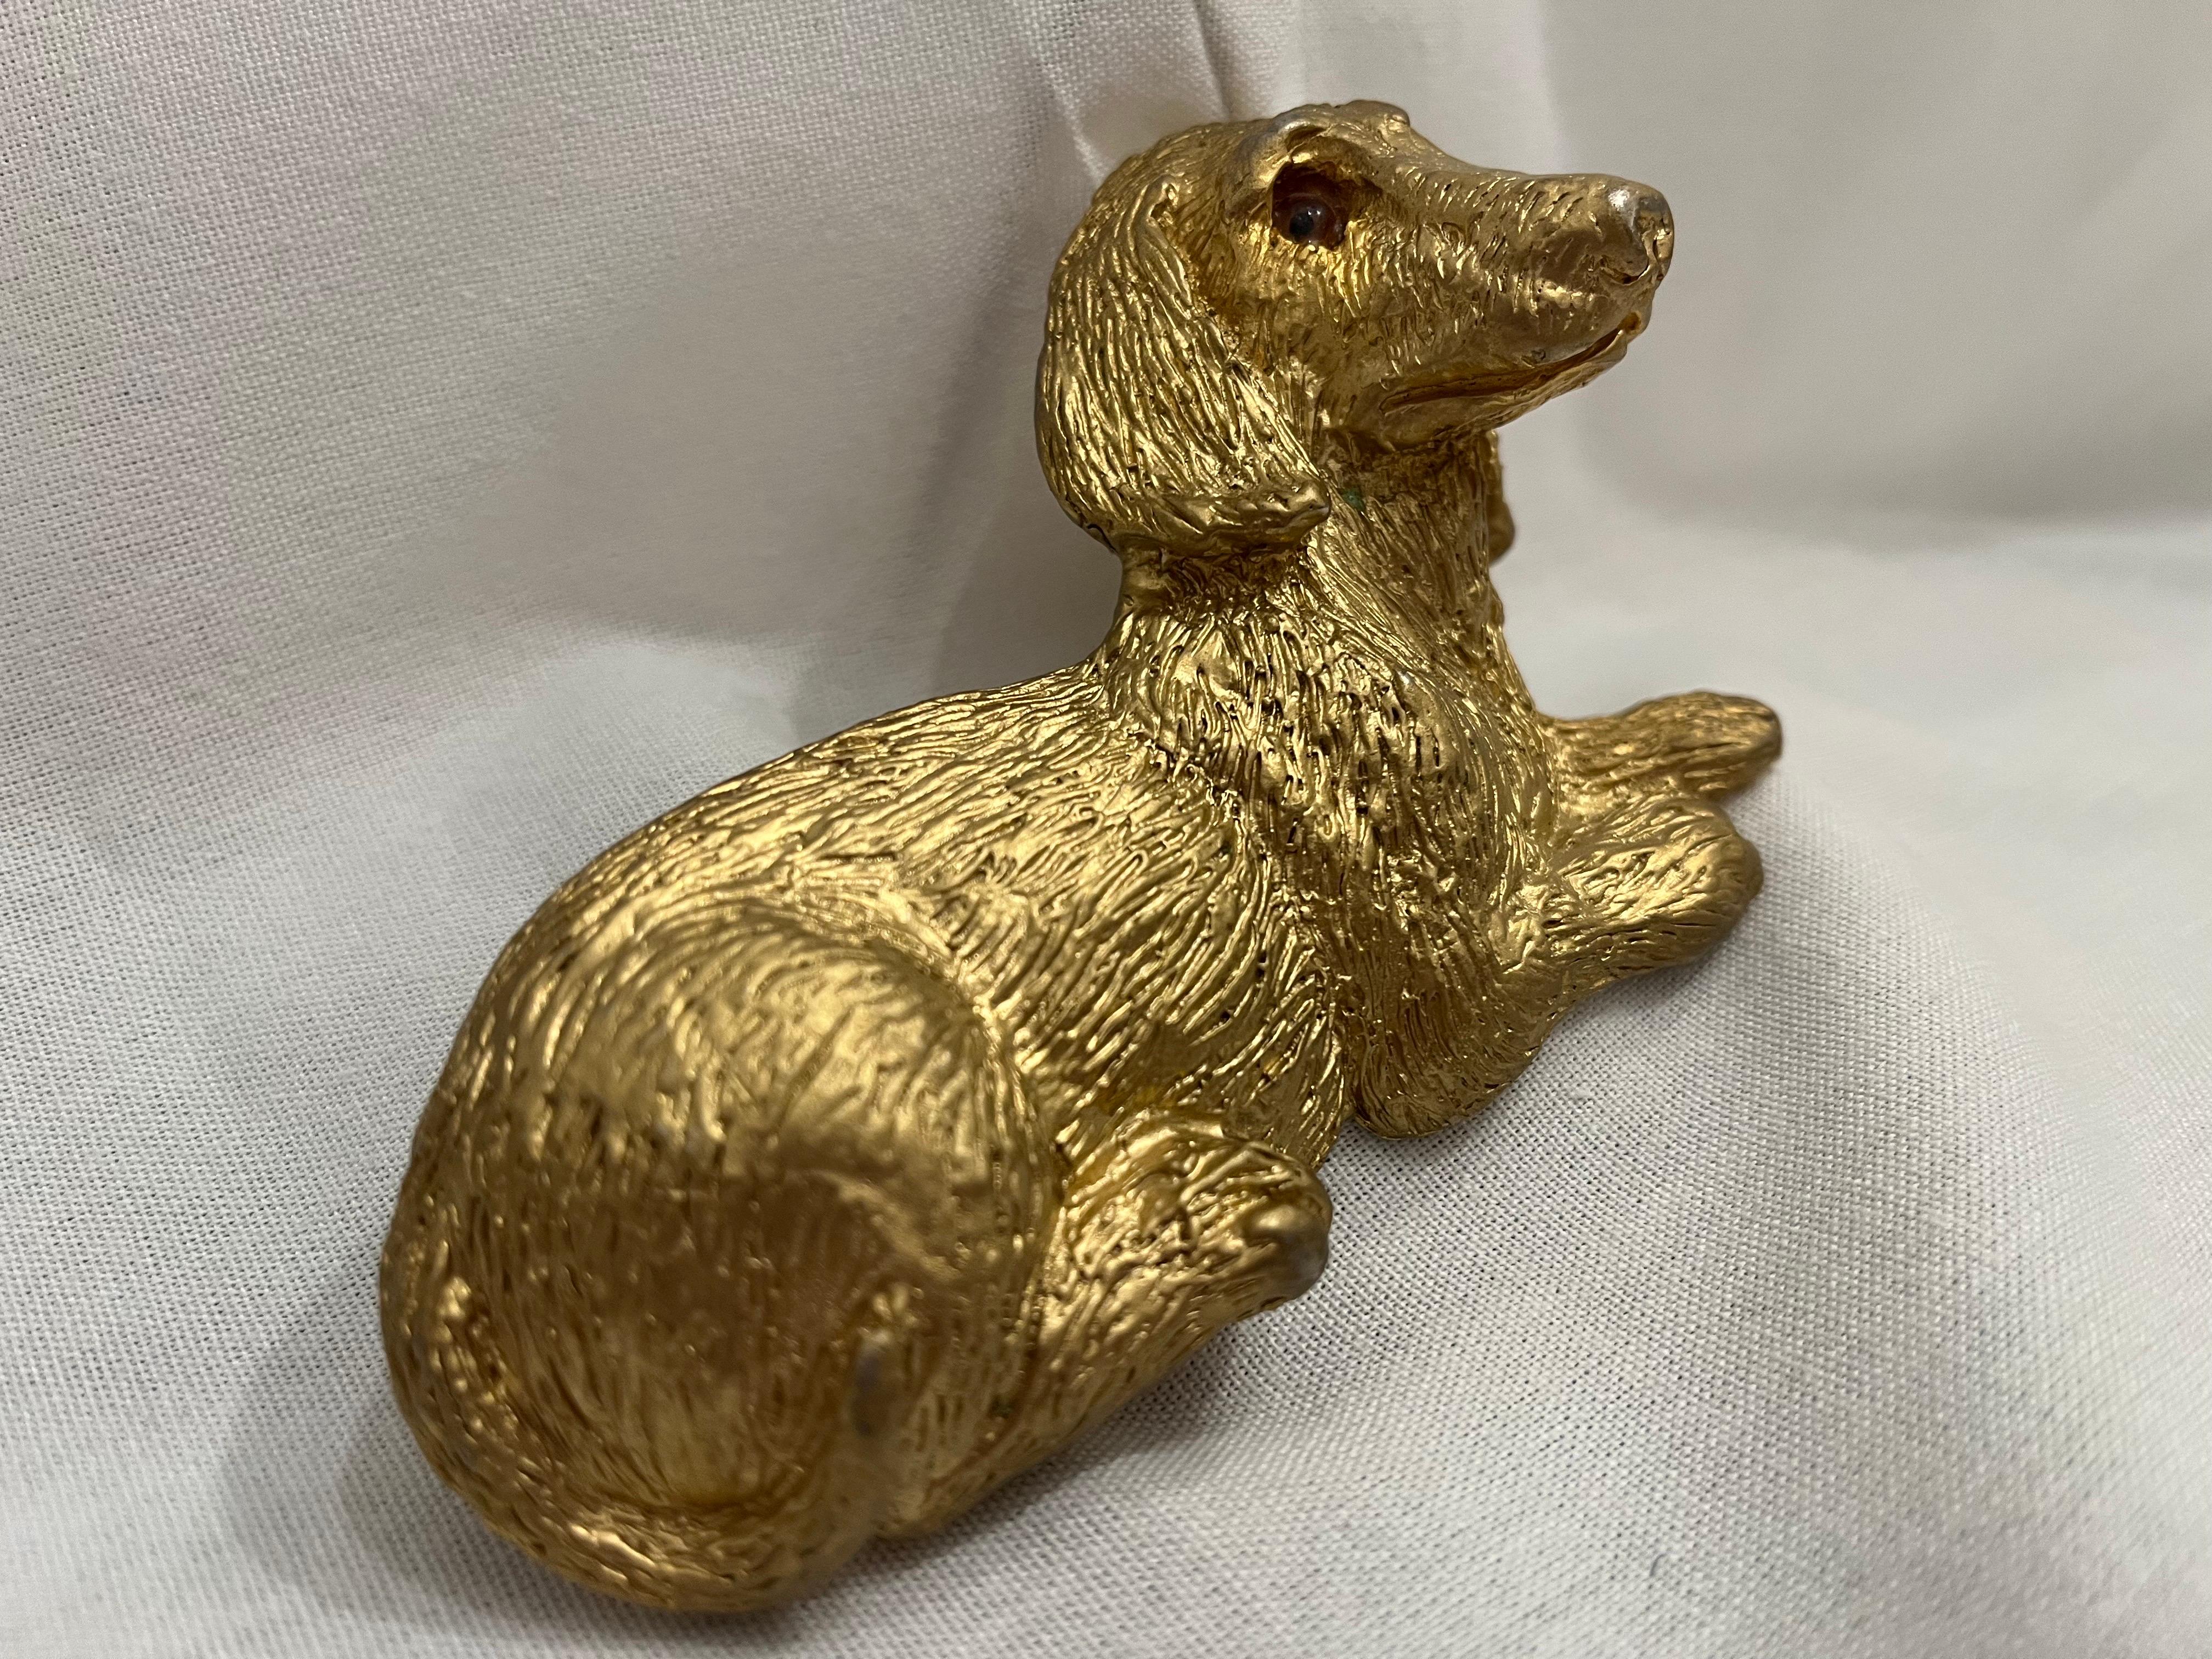 Metal Vintage 1992 Mimi Di Niscemi Signed Golden Dachshund Belt Buckle with Brown Eyes For Sale